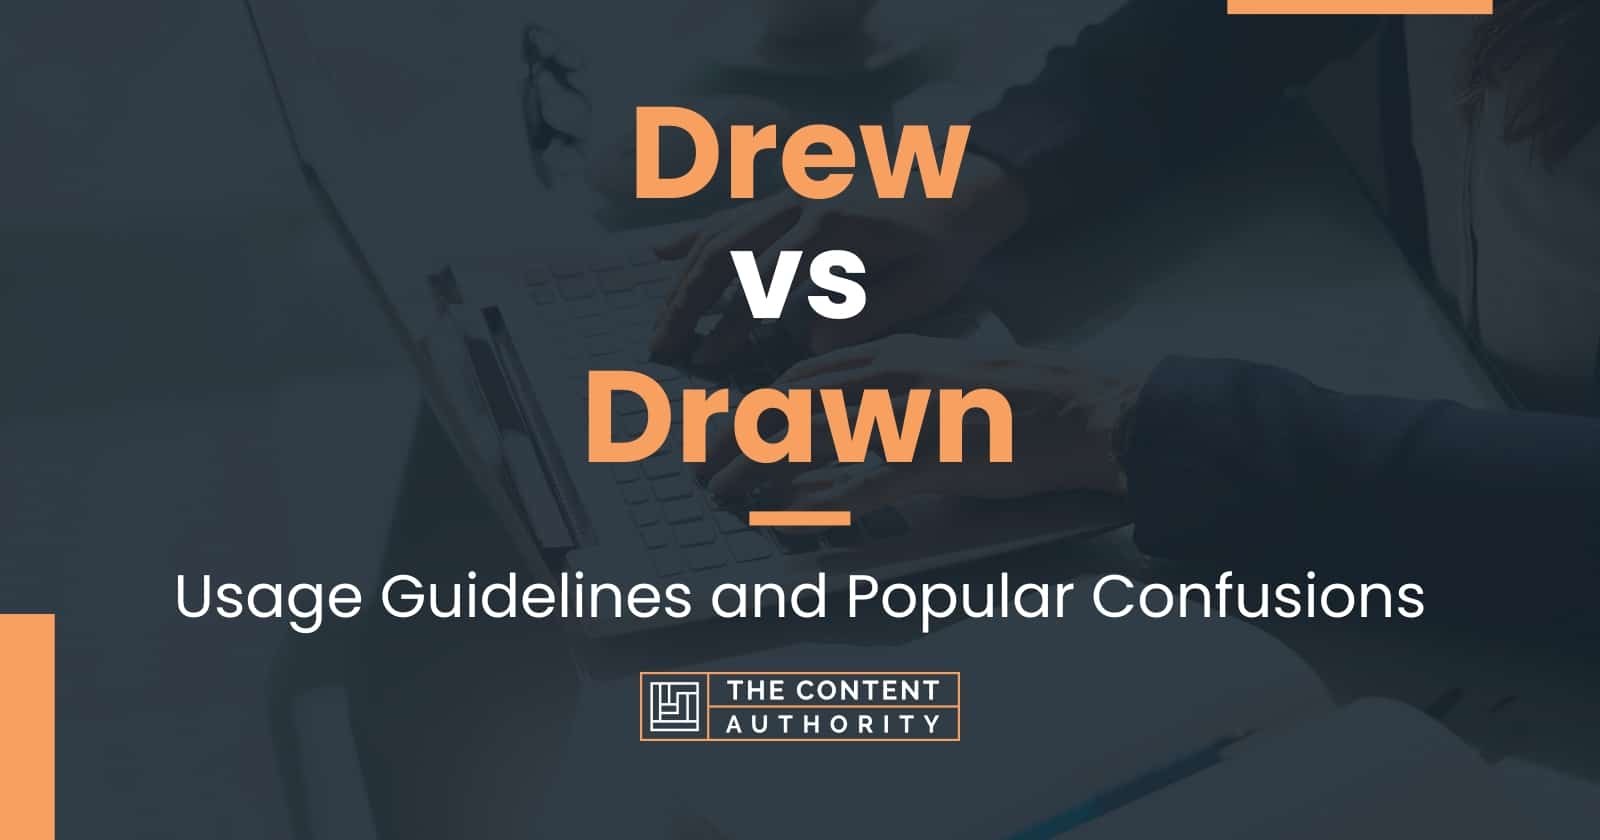 Drew vs Drawn Usage Guidelines and Popular Confusions